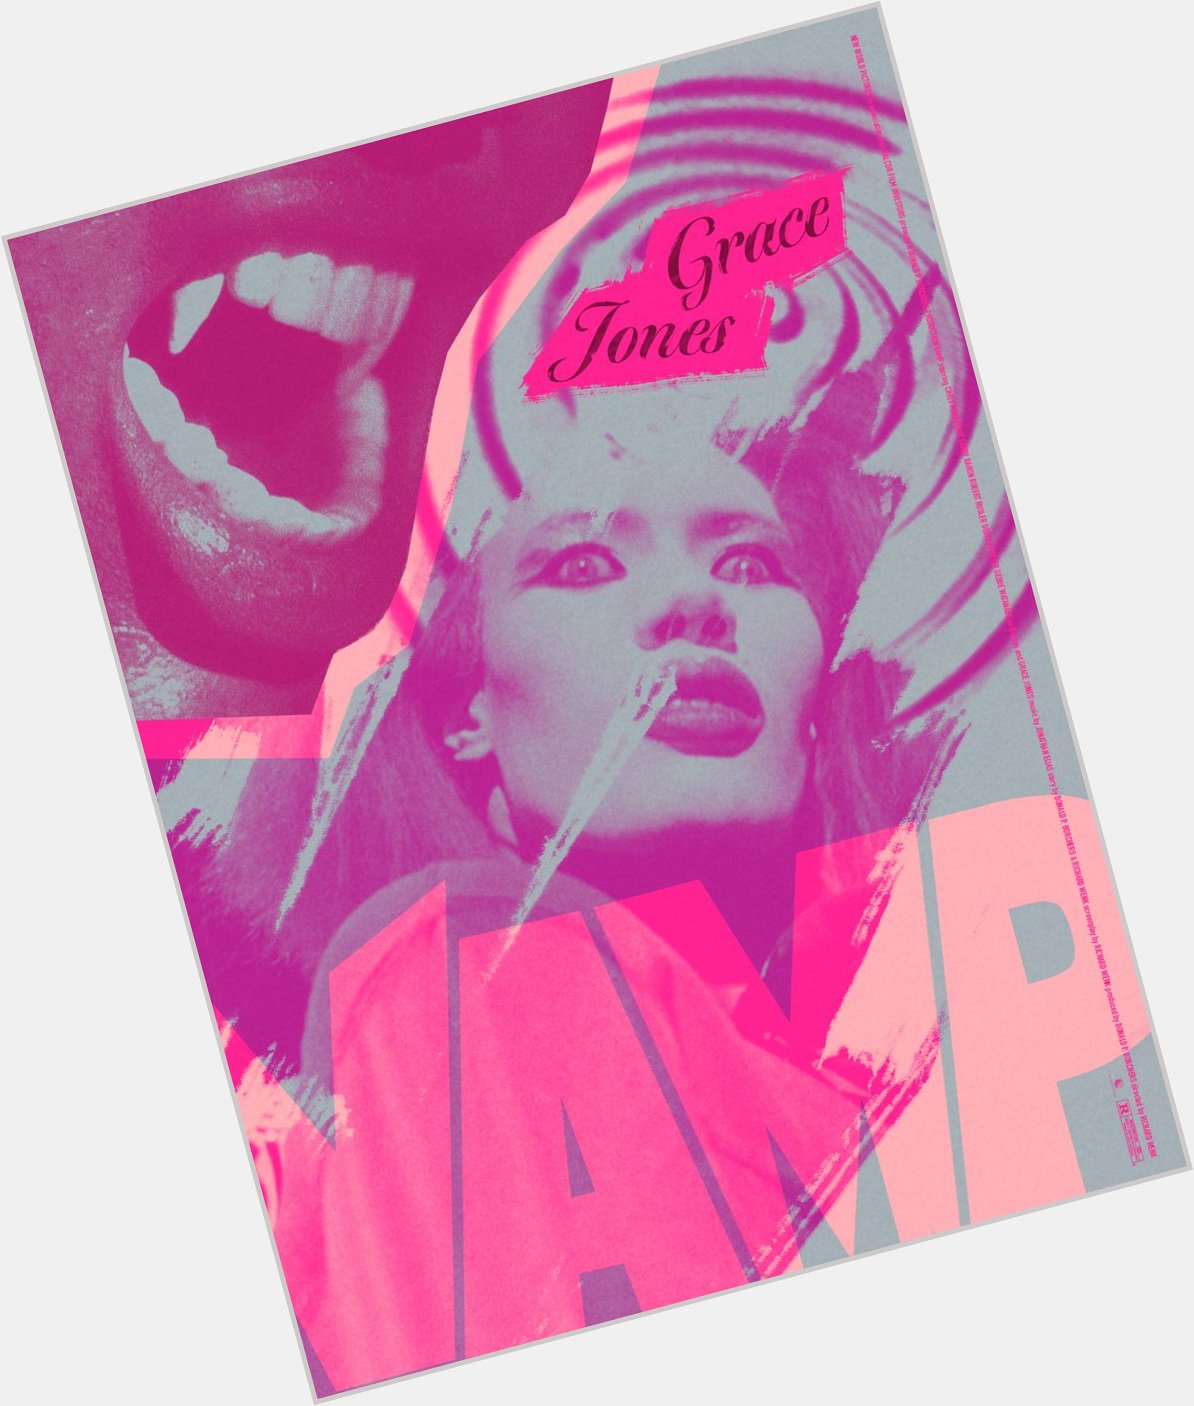 Happy Birthday Grace Jones! Here\s a punky Vamp poster I made a few months ago to celebrate 